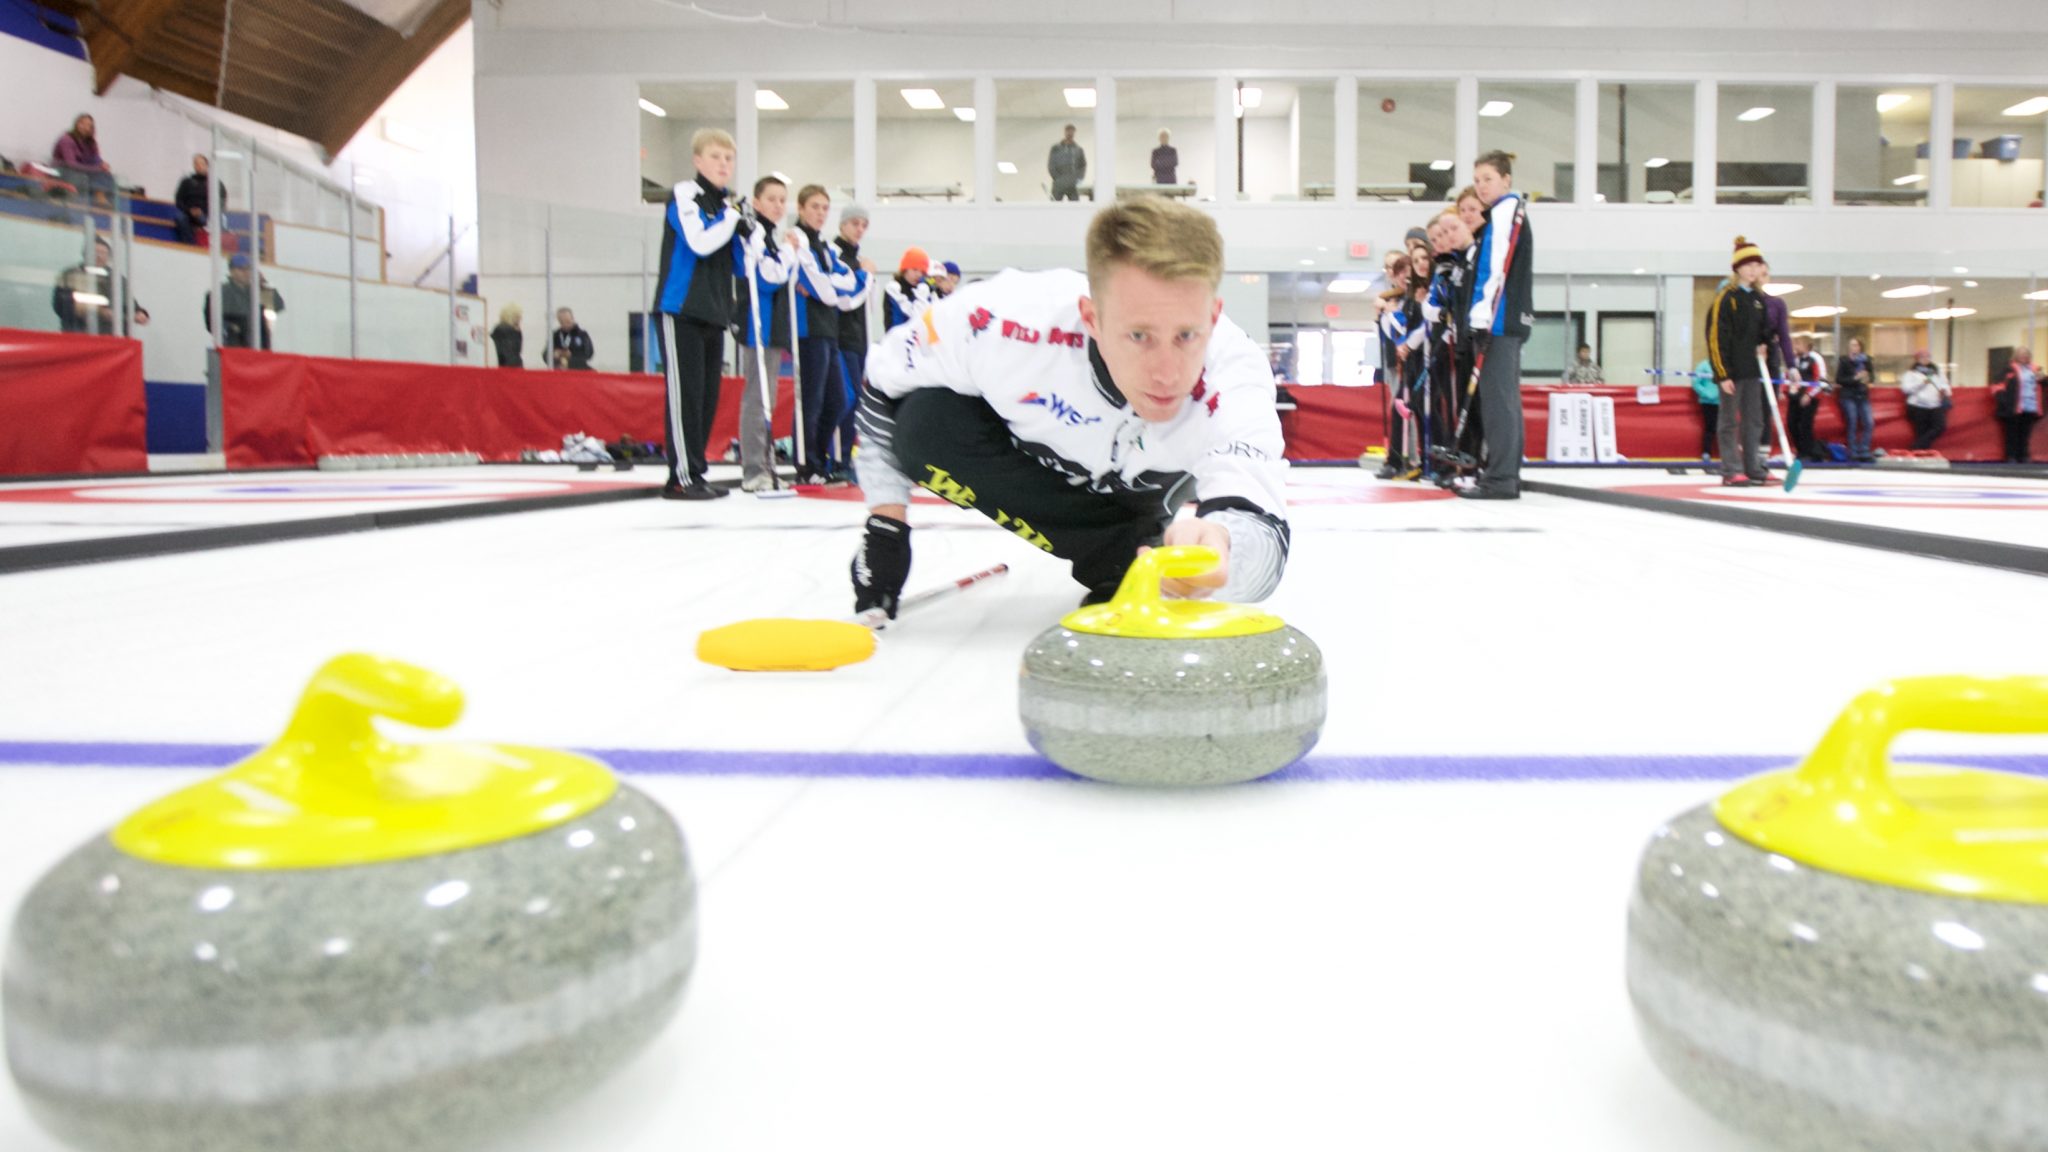 How Left Handed Curlers Have Adapted Their Game The Grand Slam Of Curling